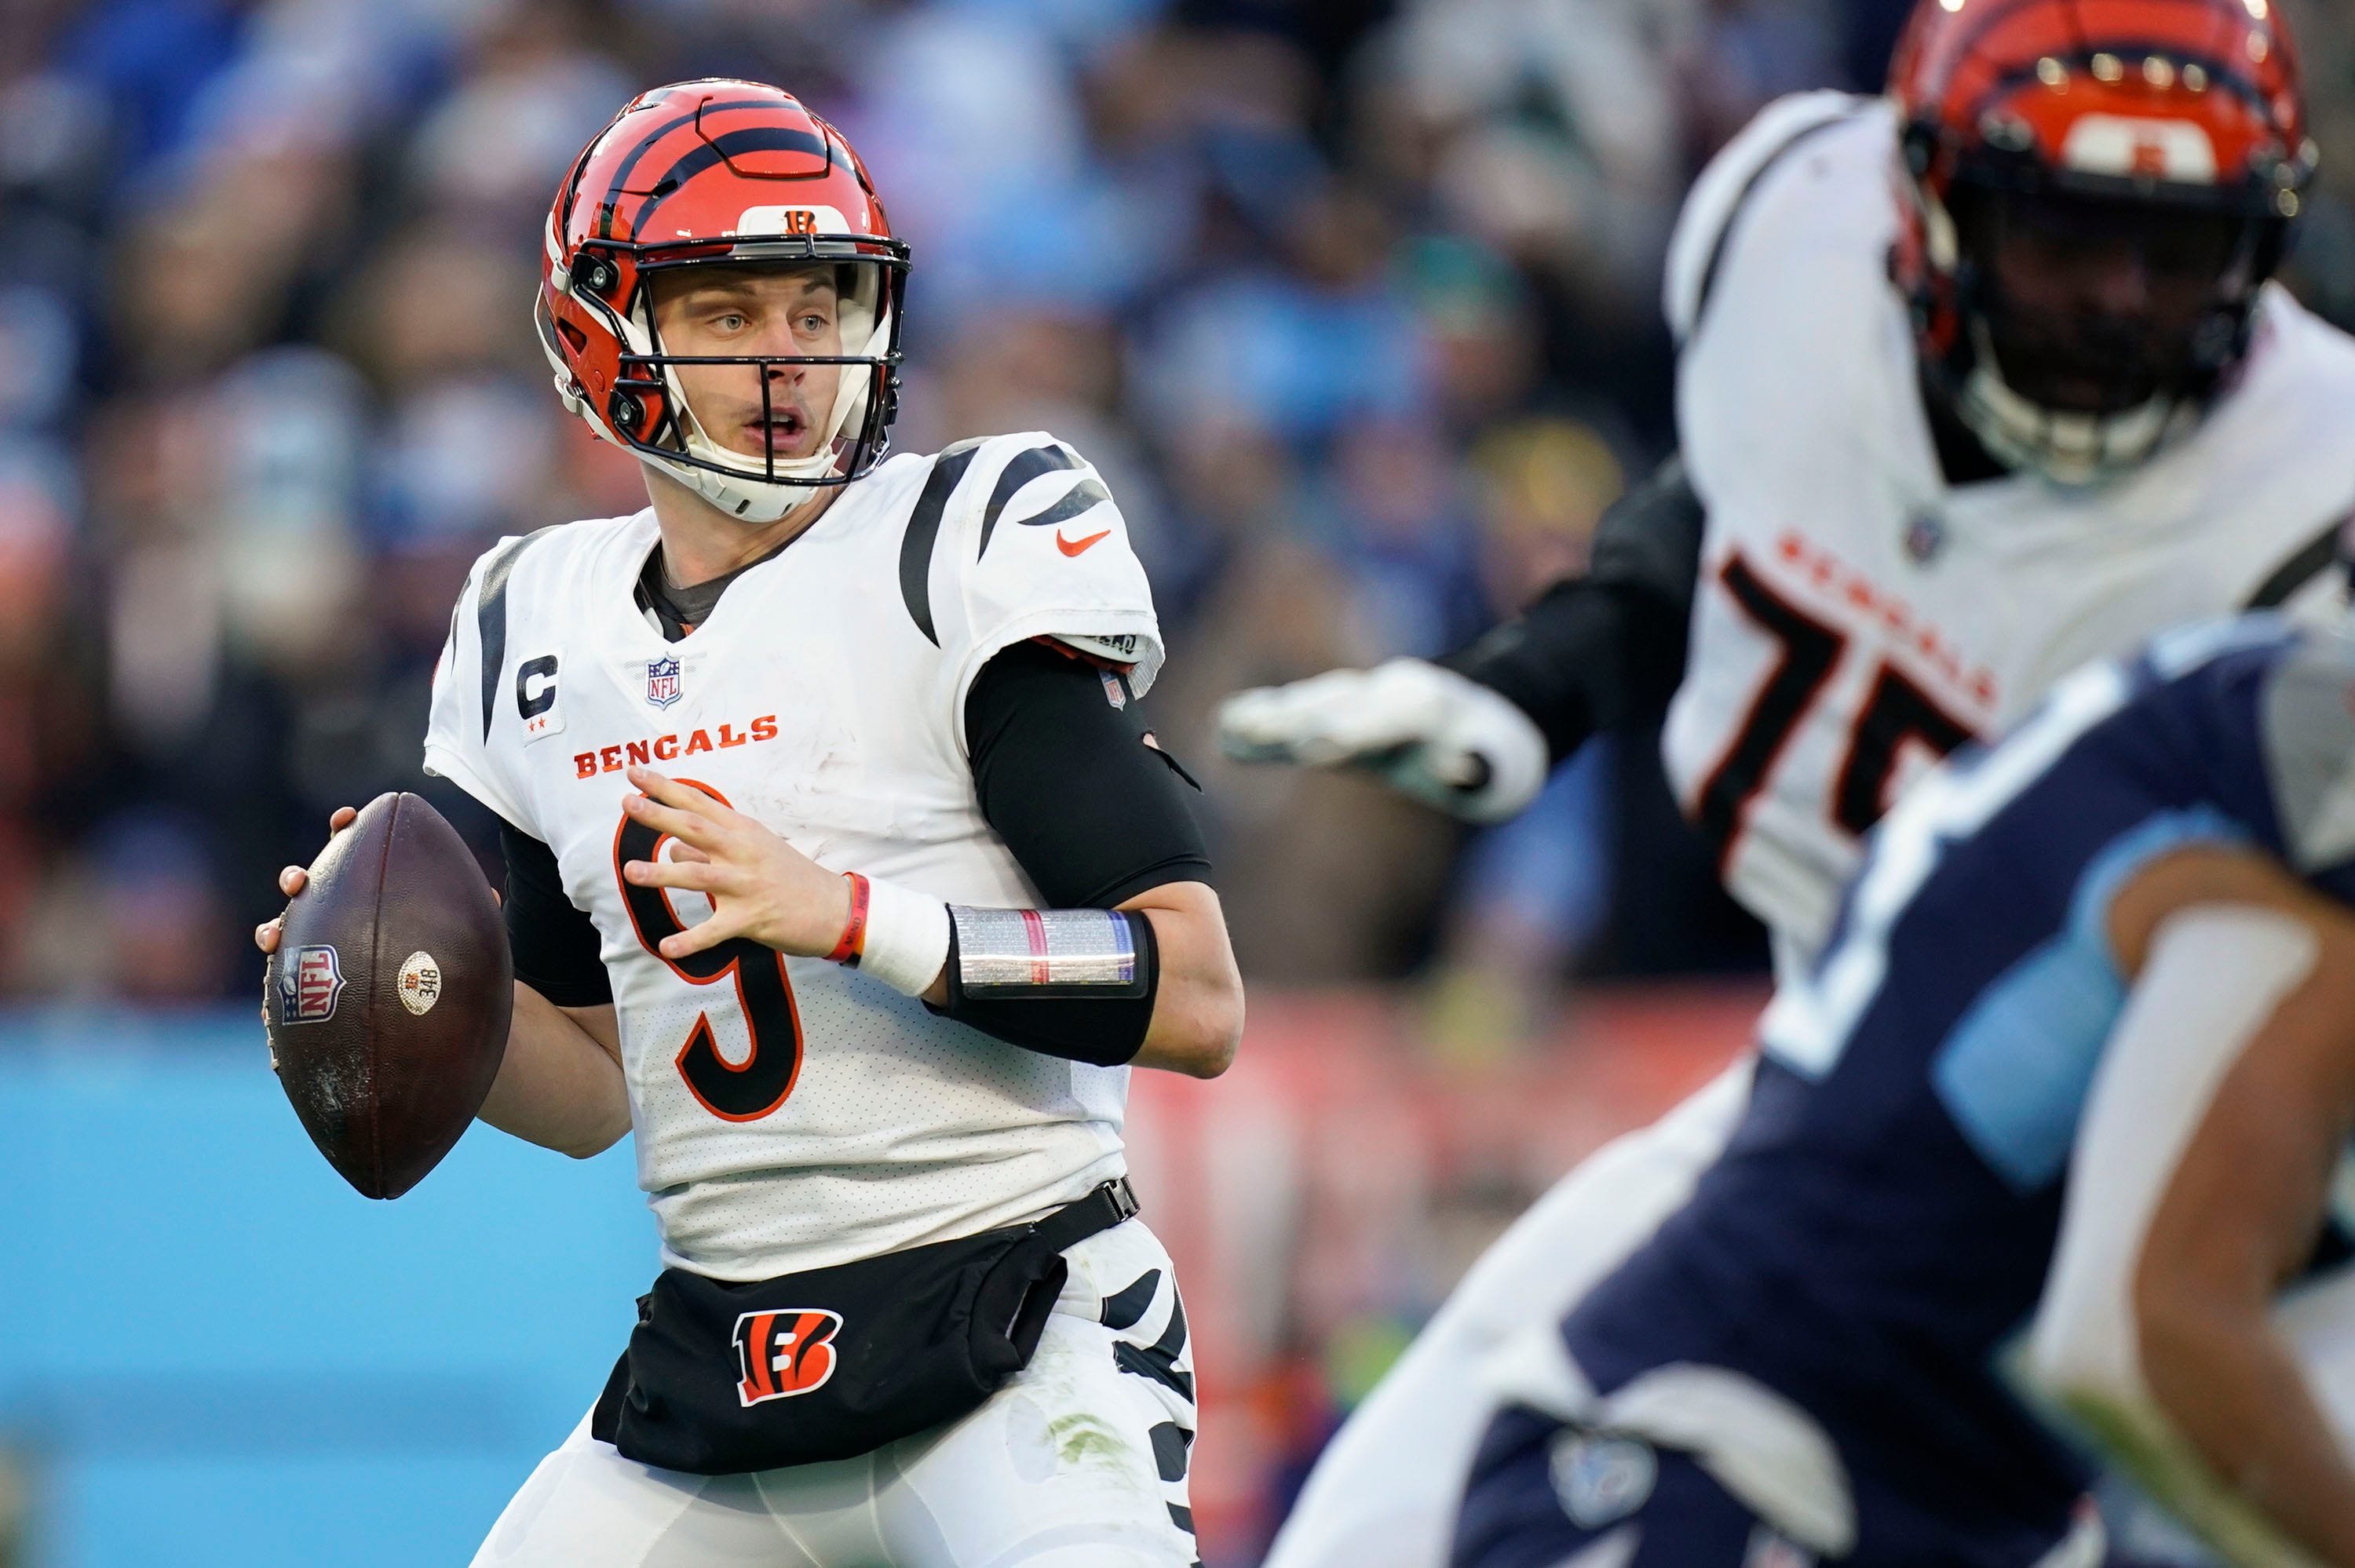 WATCH: Full highlights from Bengals' last second-win over Titans in NFL playoffs